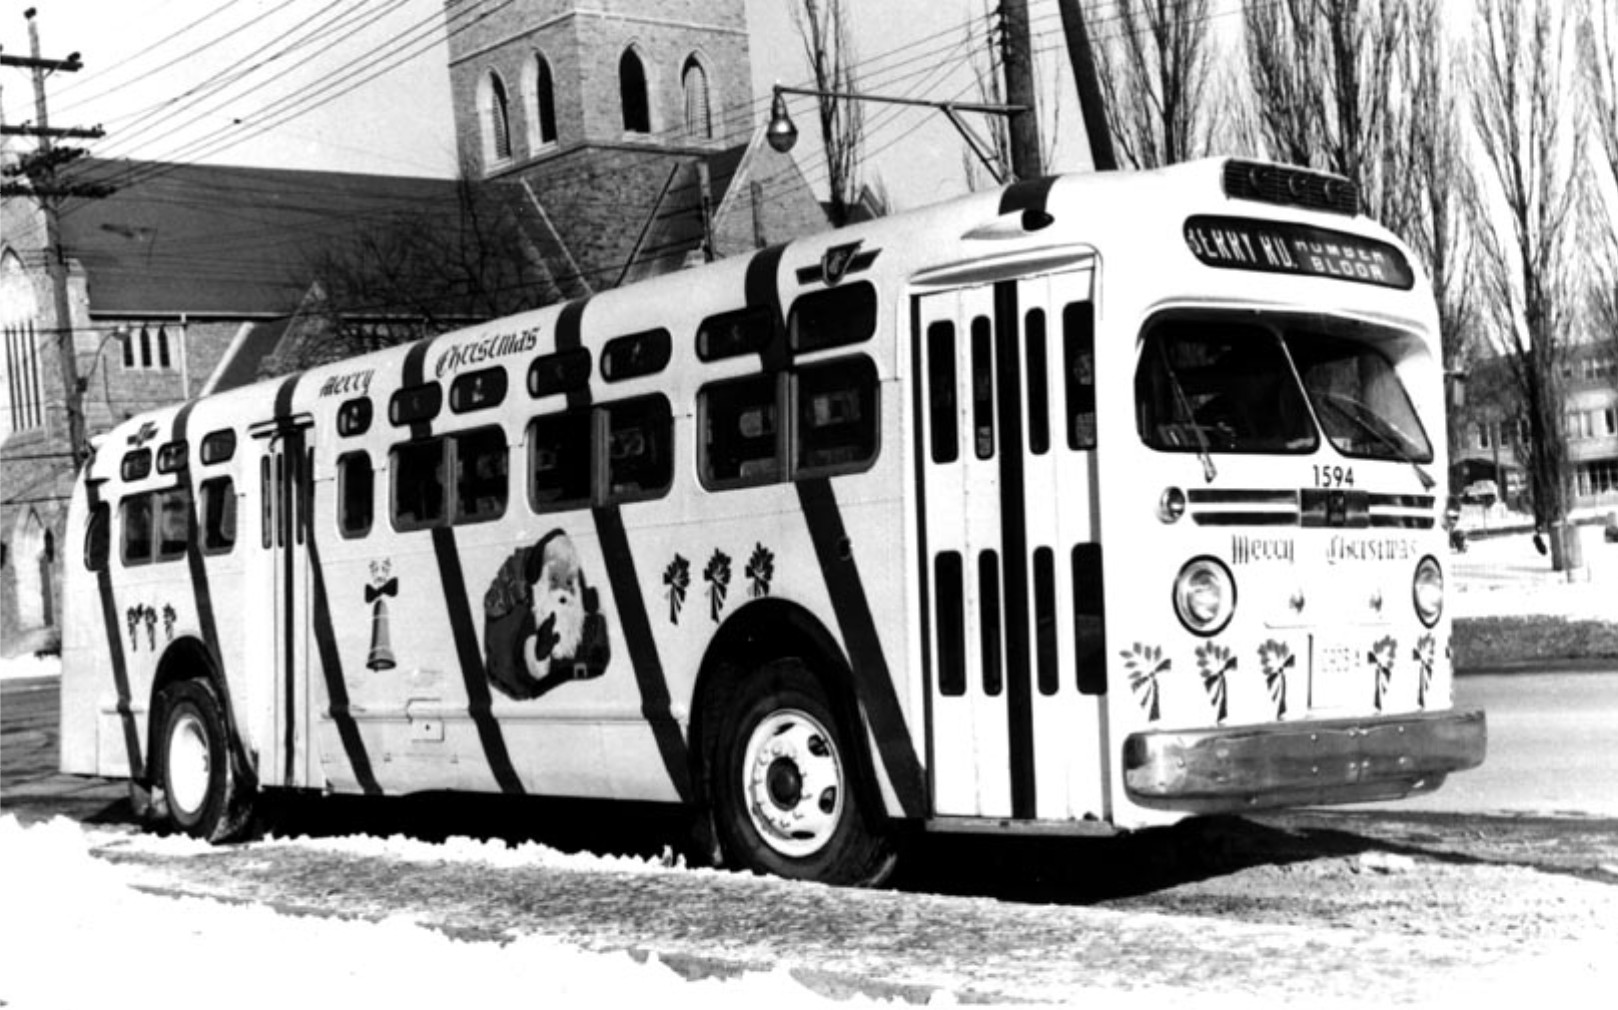 19561200 - Christmas Buses - 1594 at Prince Edward and Bloor